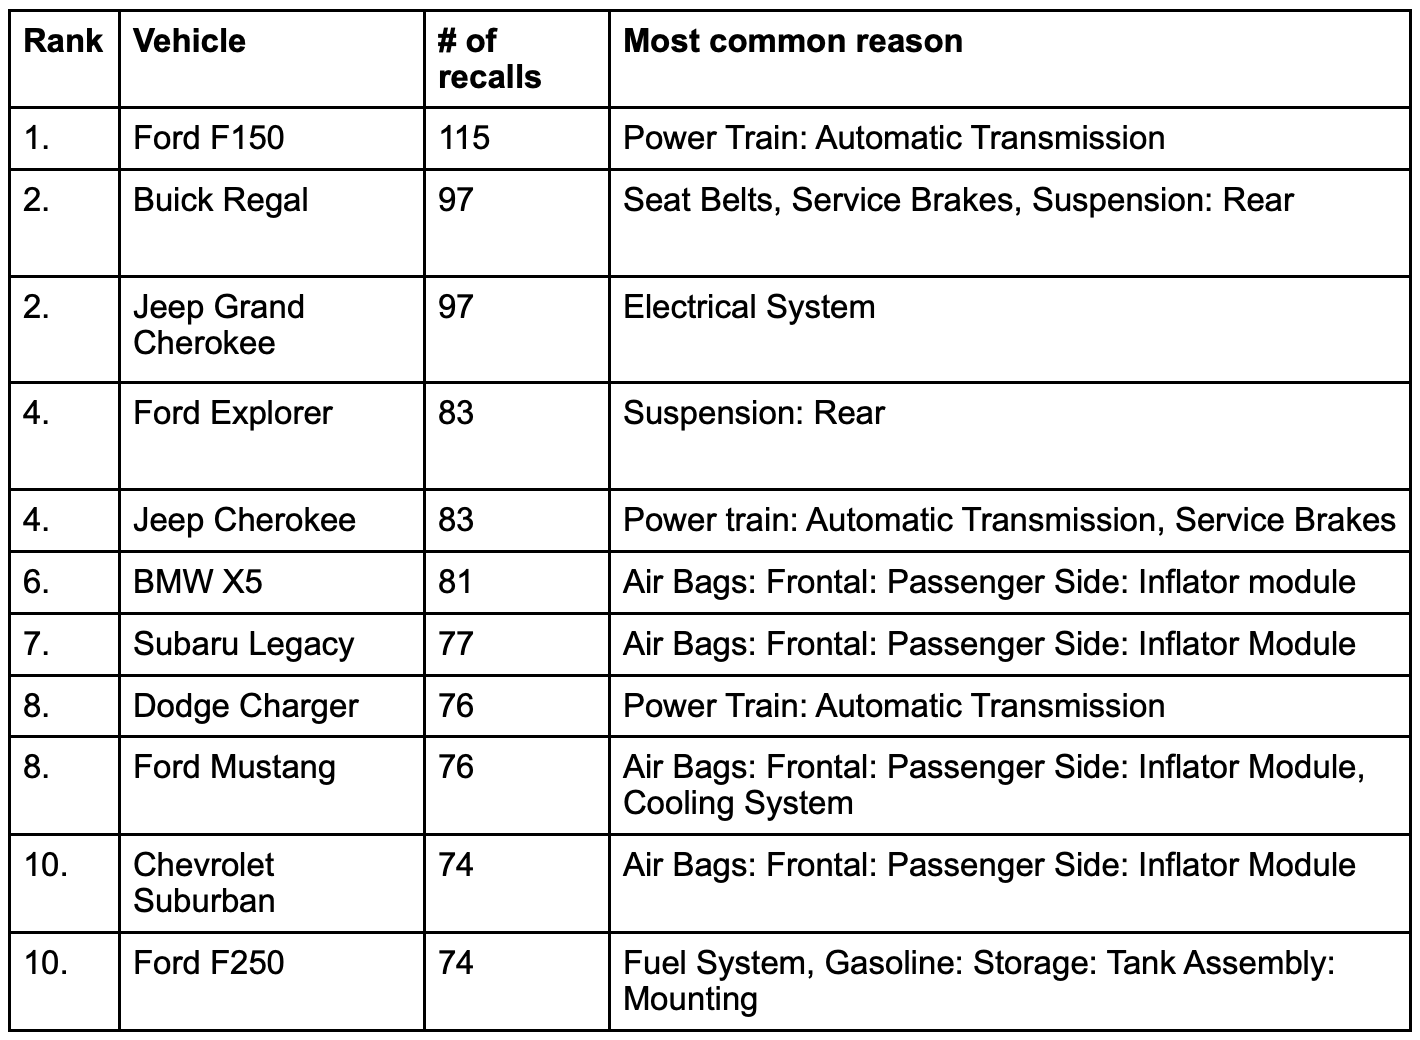 Top 10 recalled vehicles; chart courtesy of author.